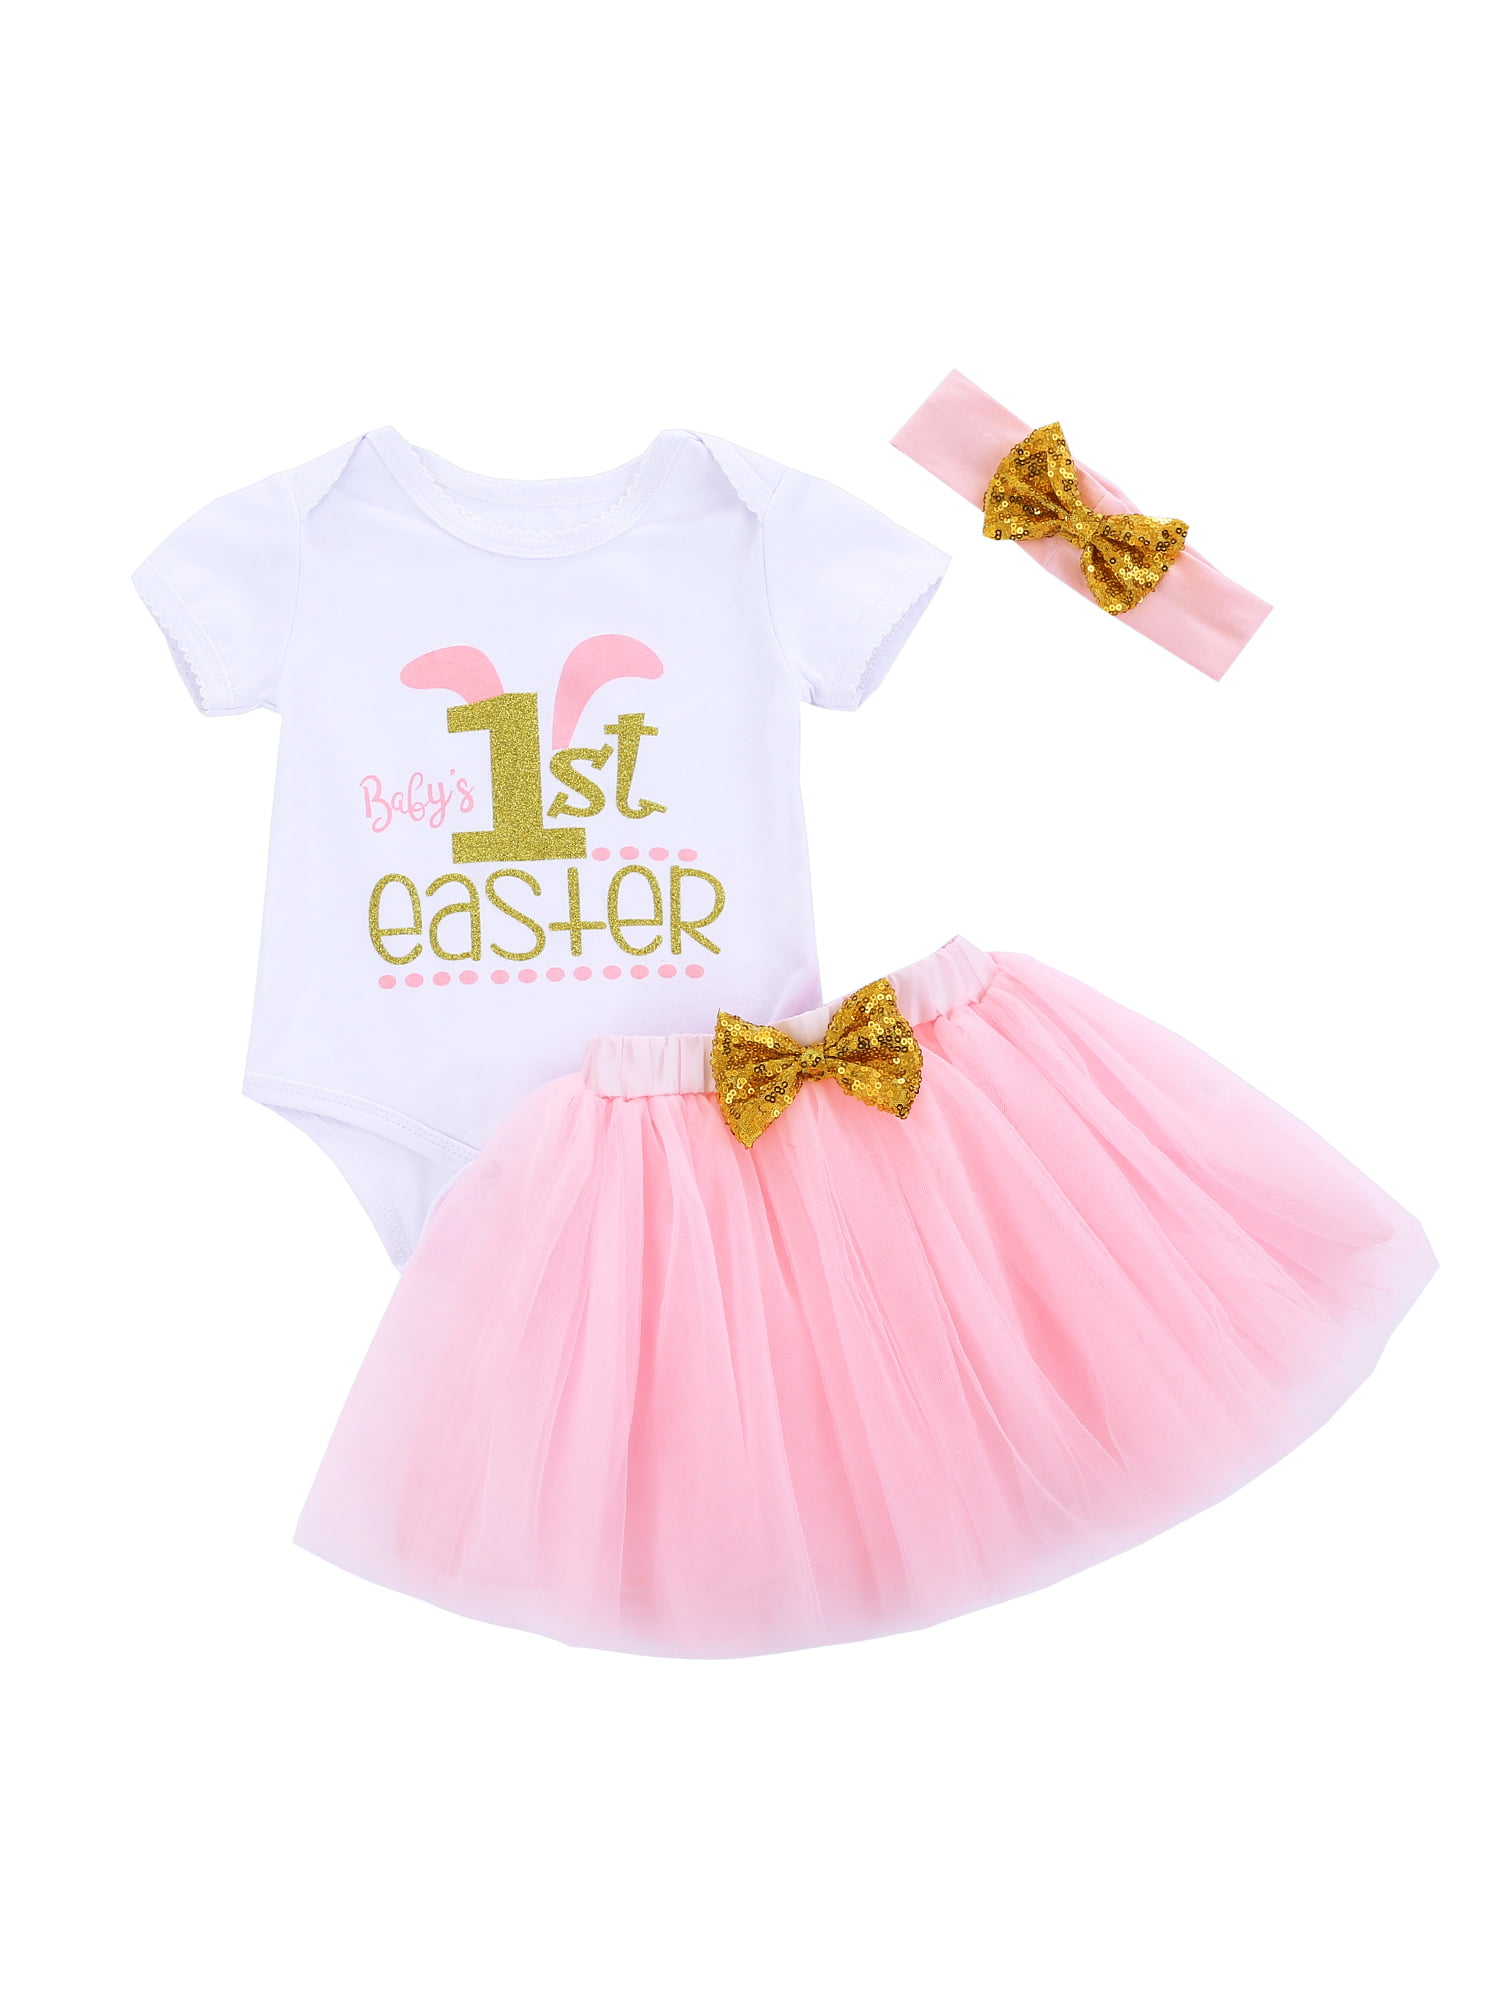 Newborn Infant Baby Girls Clothes Letter Print Romper+Bowknot Tutu Skirt Outfits Sets 